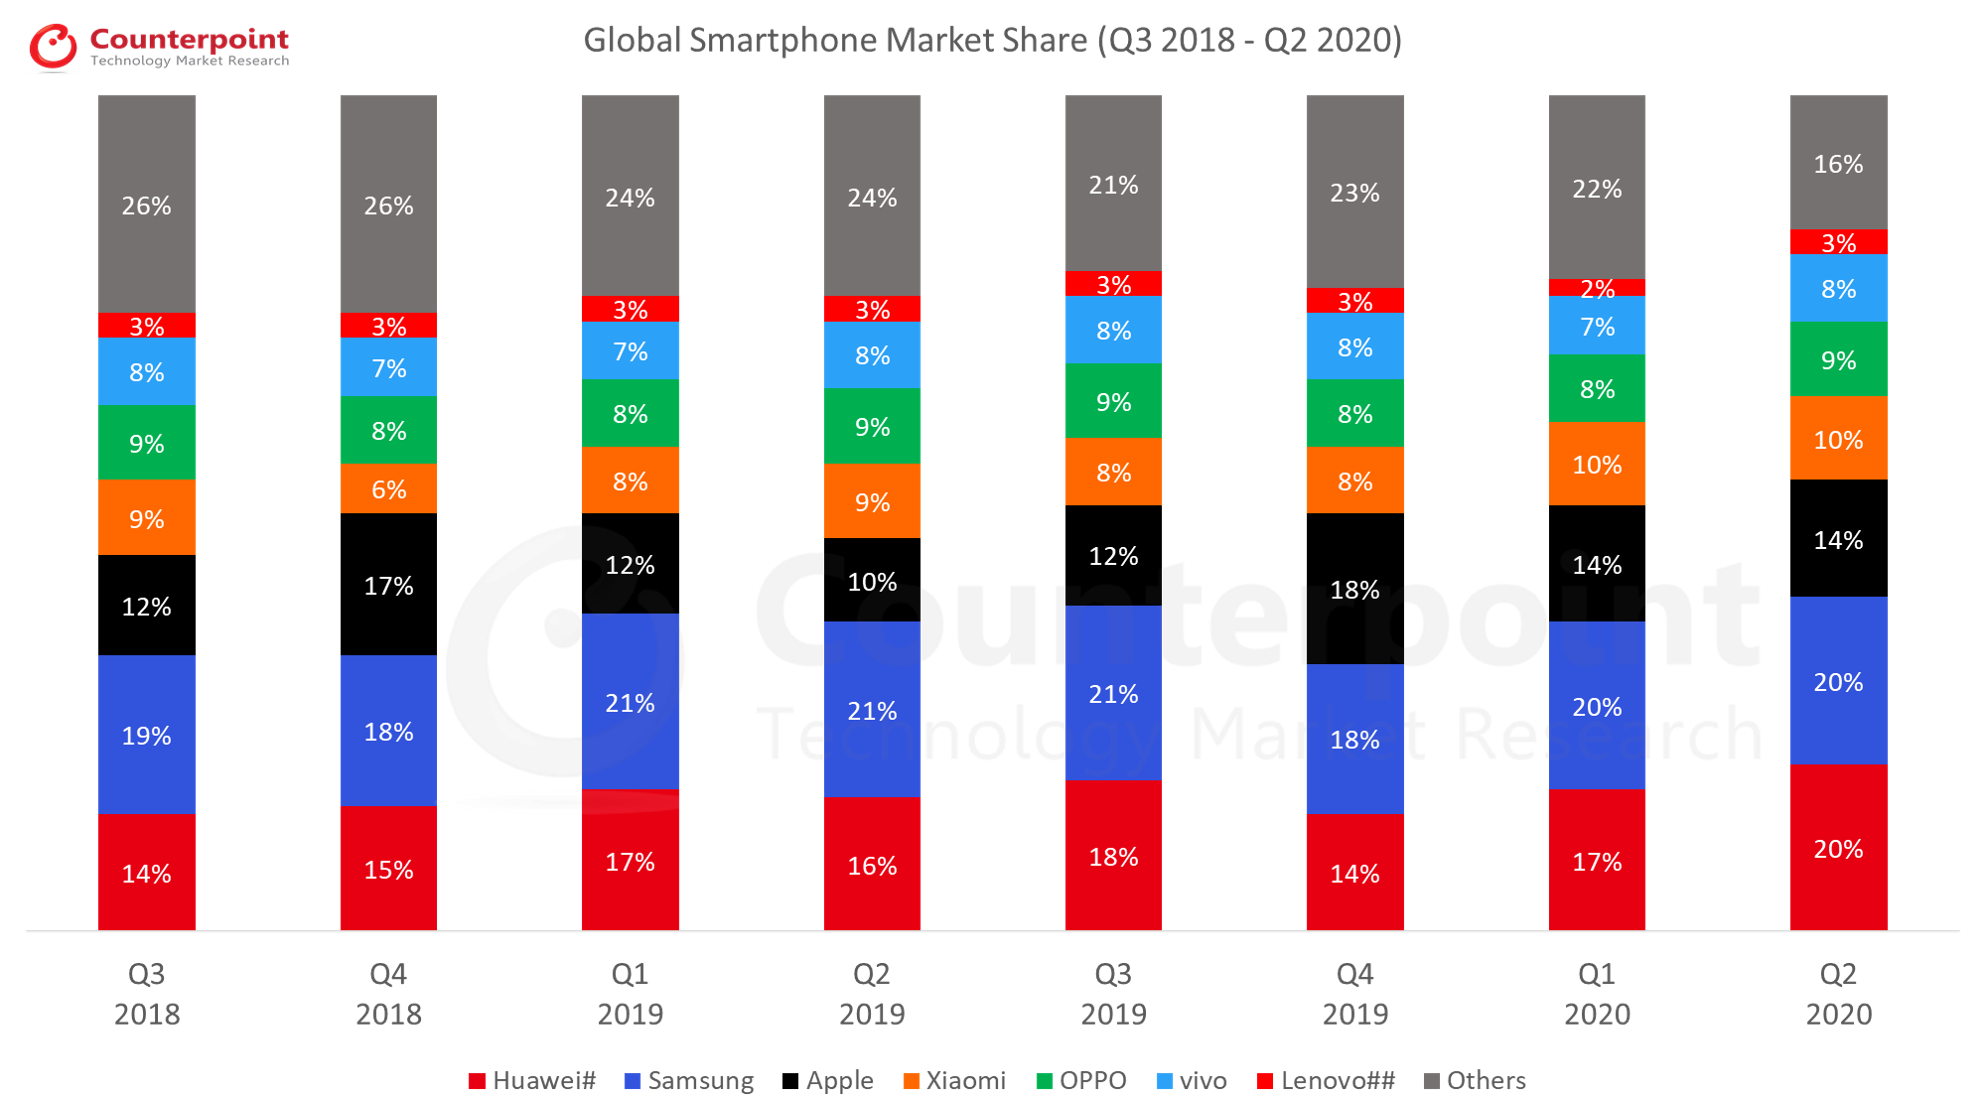 Counterpoint Research - Q2 2020 - Global Smartphone Market